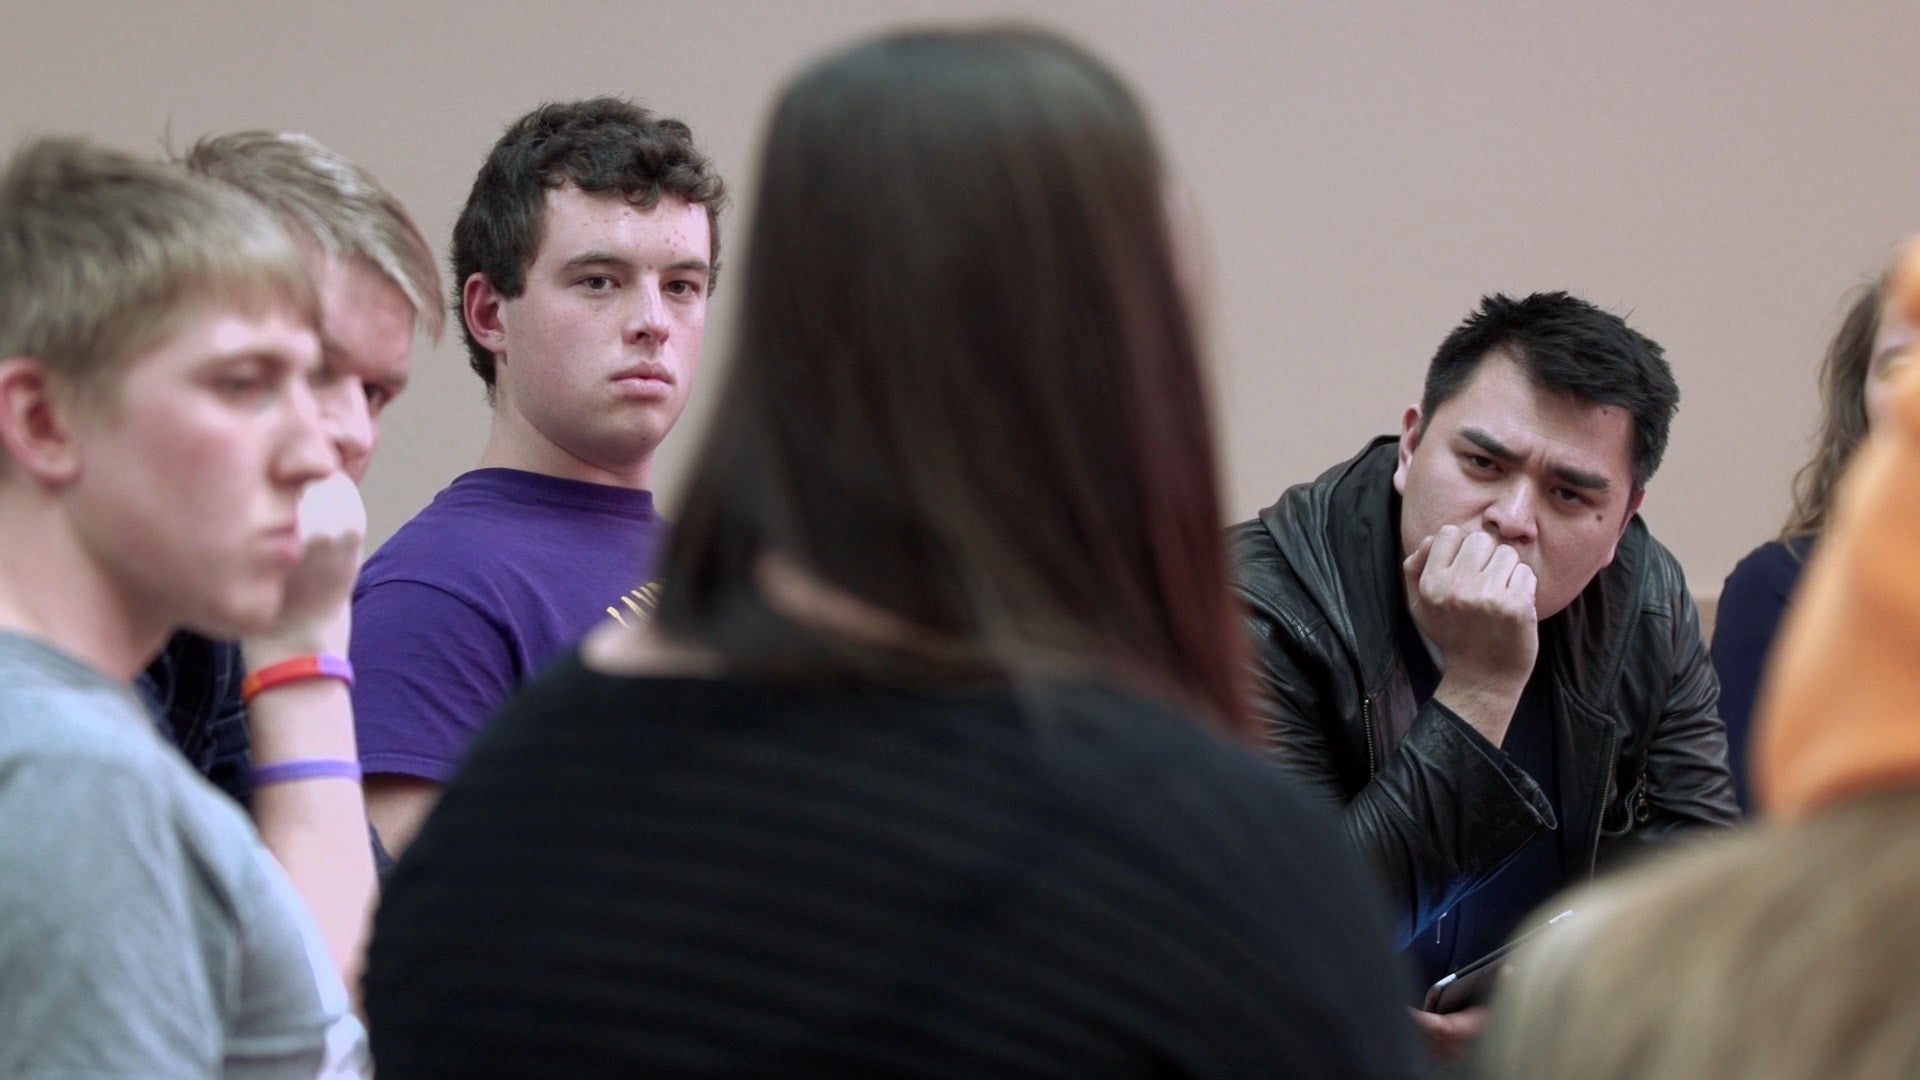 Filmmaker Jose Antonio Vargas, right, listens to a group of young people during the filming of his documentary "White People."